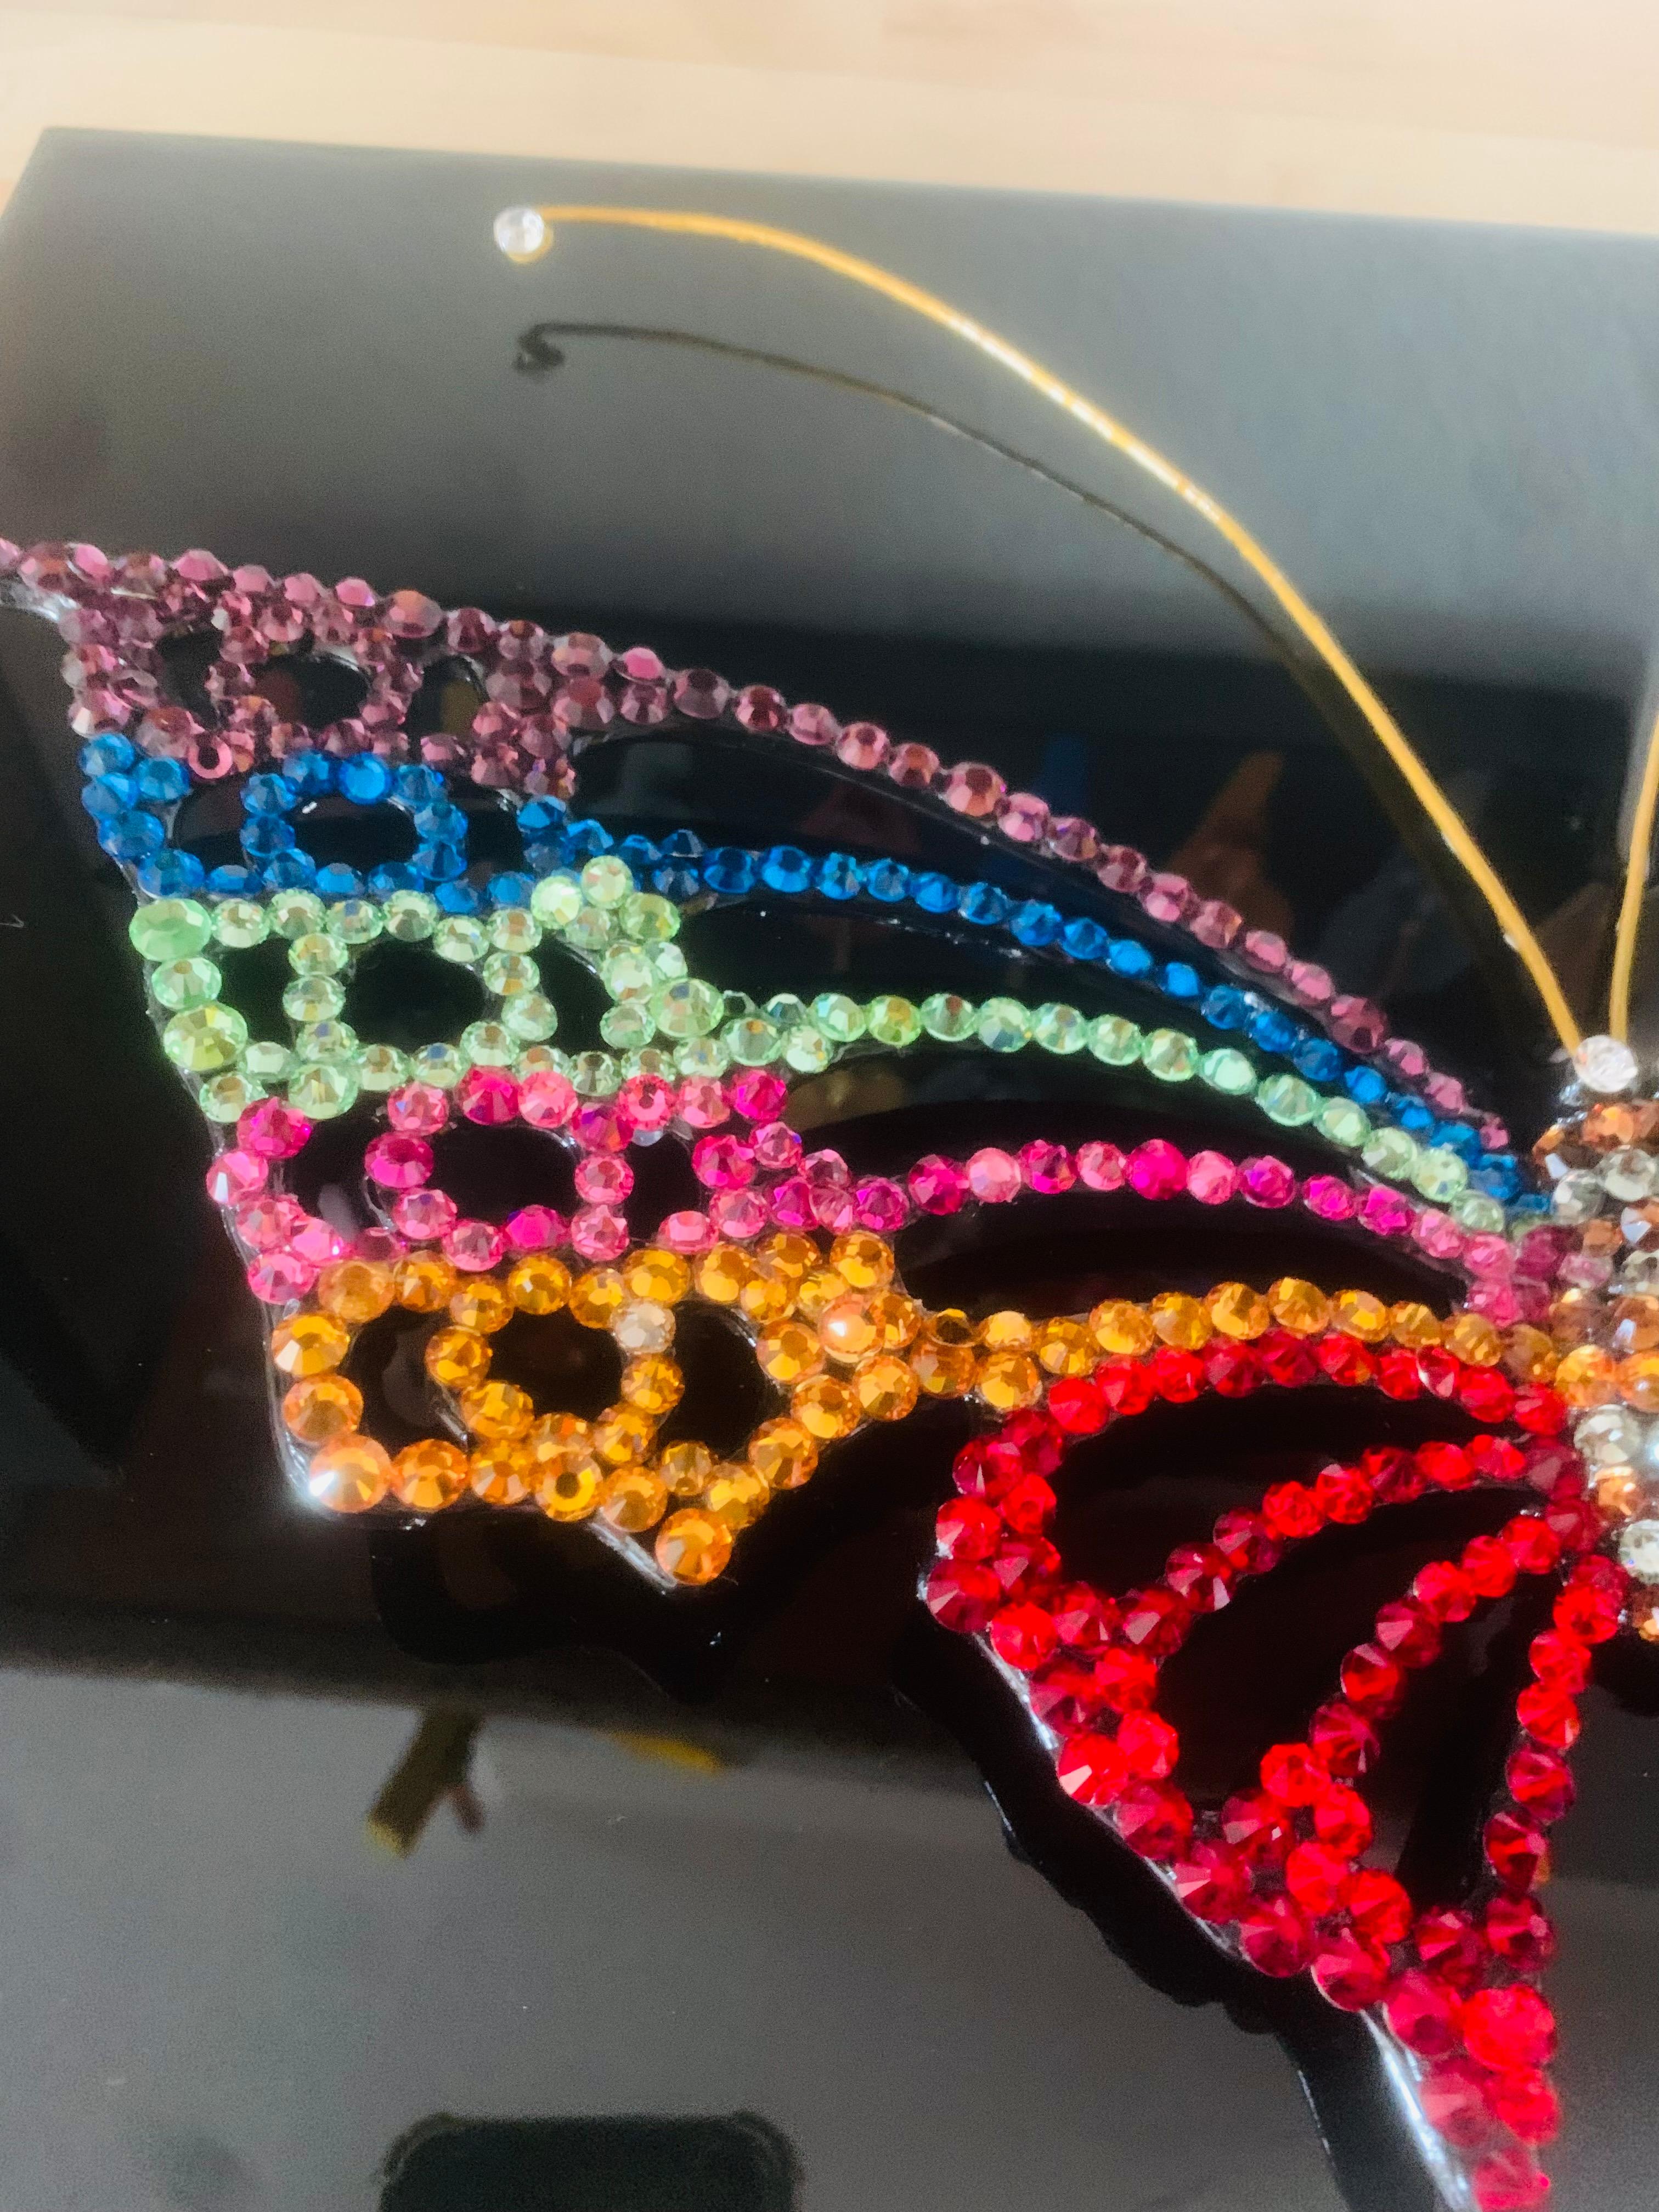 PRIDE BUTTERFLY (One of a Kind Swarovski Mixed Media Sculpture) 11